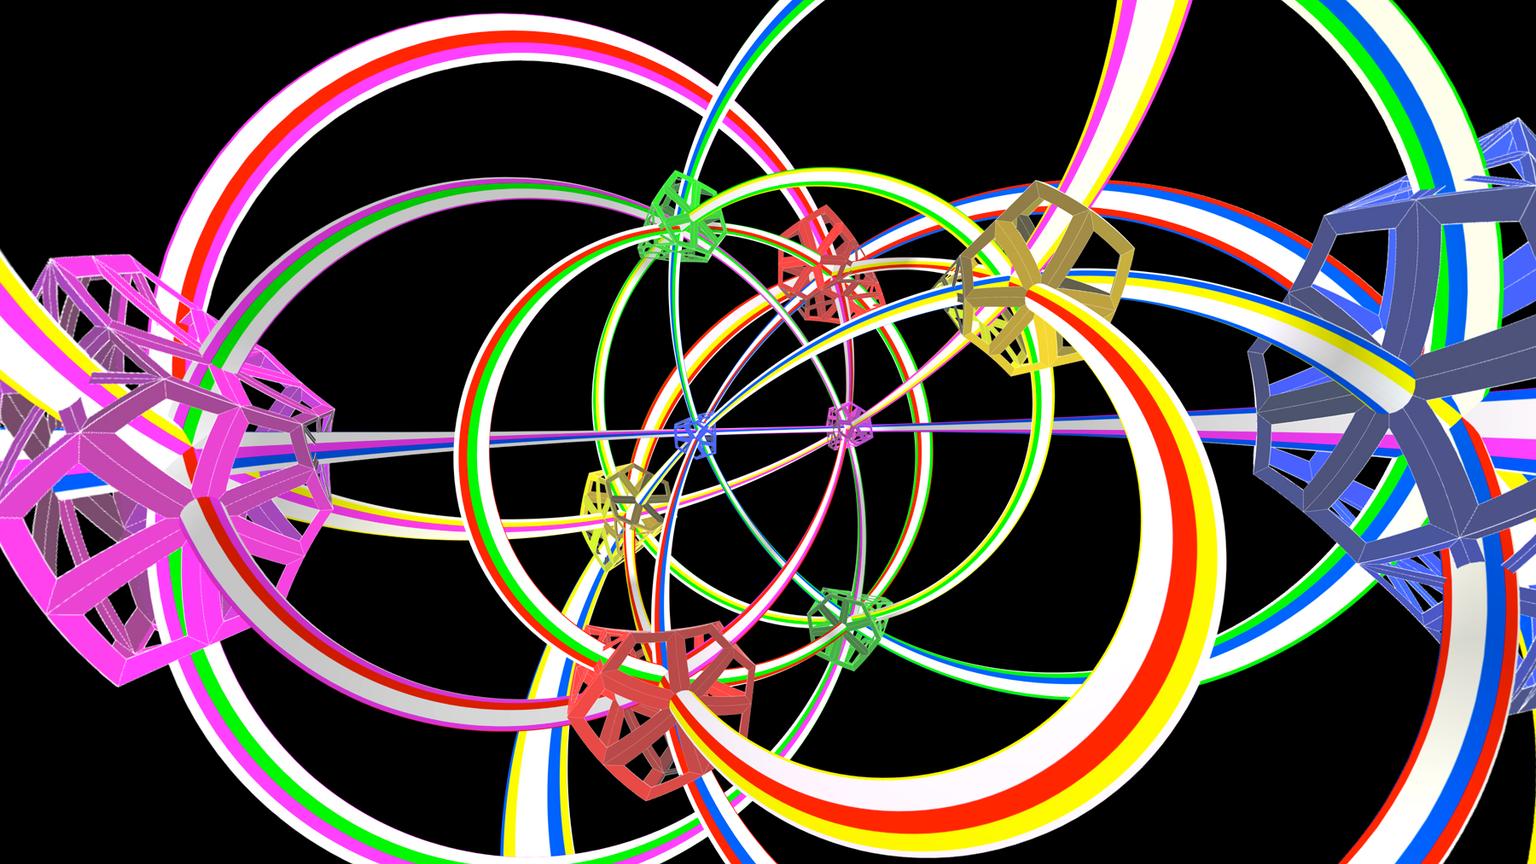 Image for entry 'View of the 10-cell in the 3-sphere, with central symmetry axes'